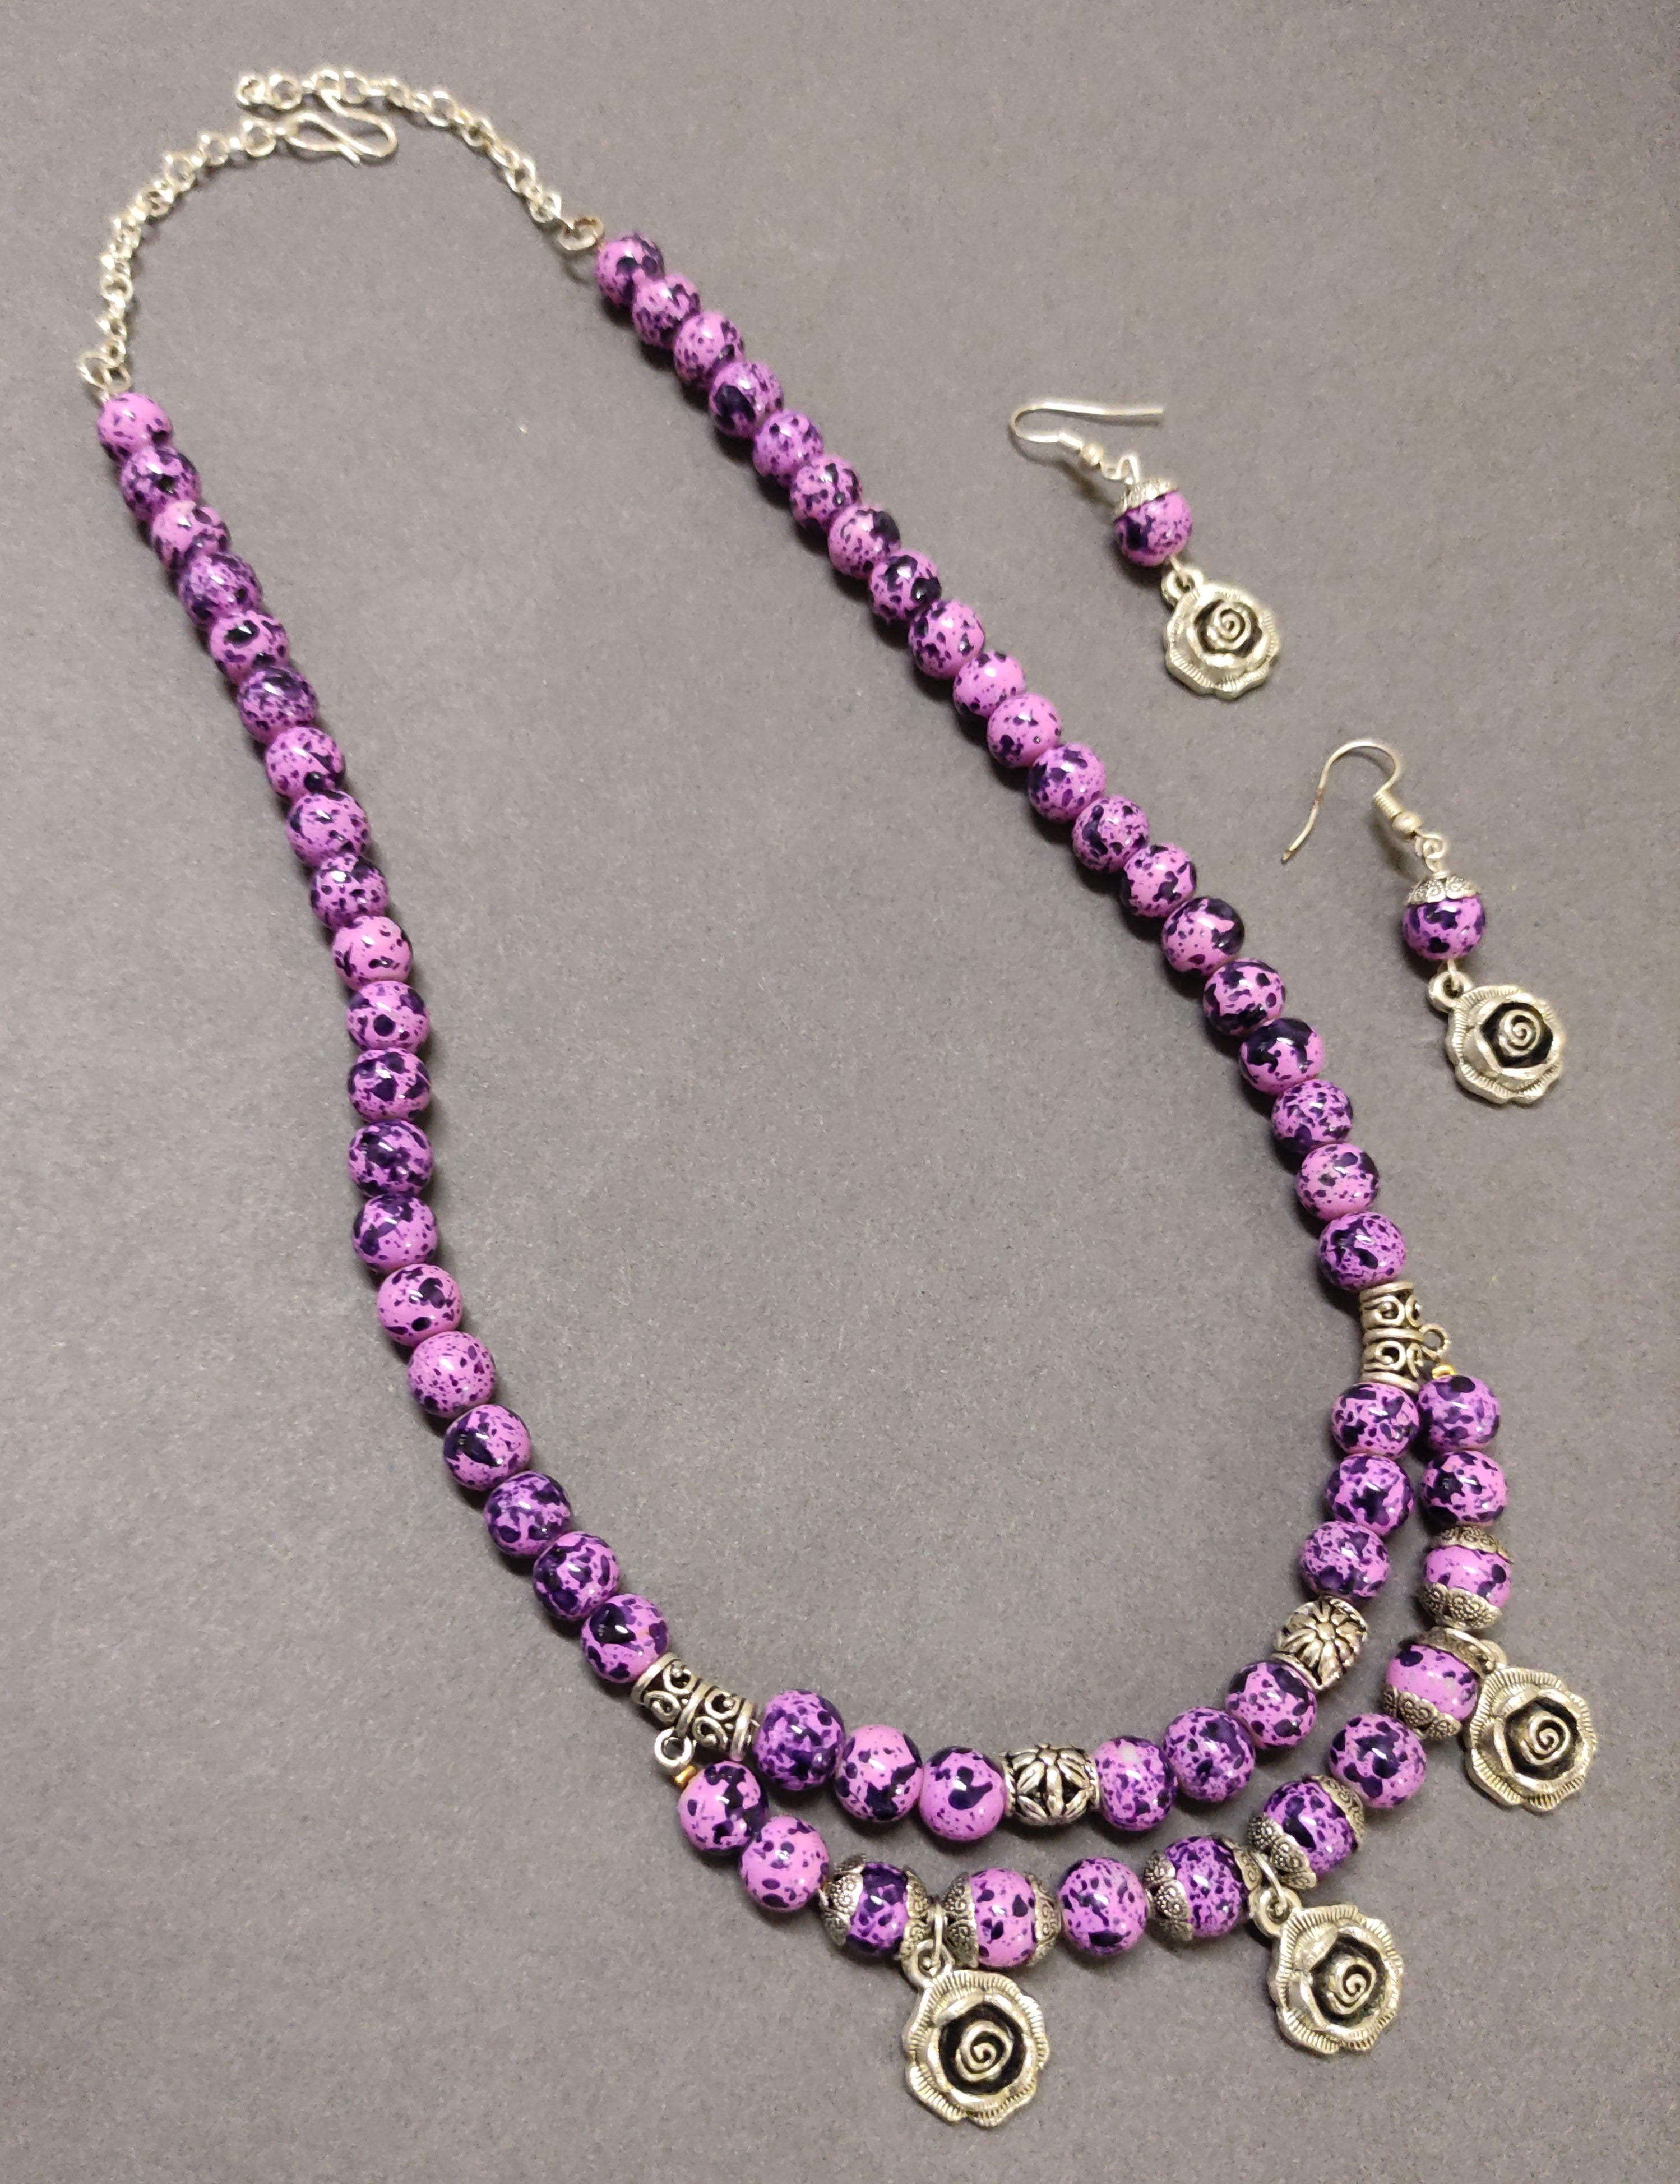 Glass Seed Bead Silver Lined Purple Wine Colour Necklace Extra Long | eBay